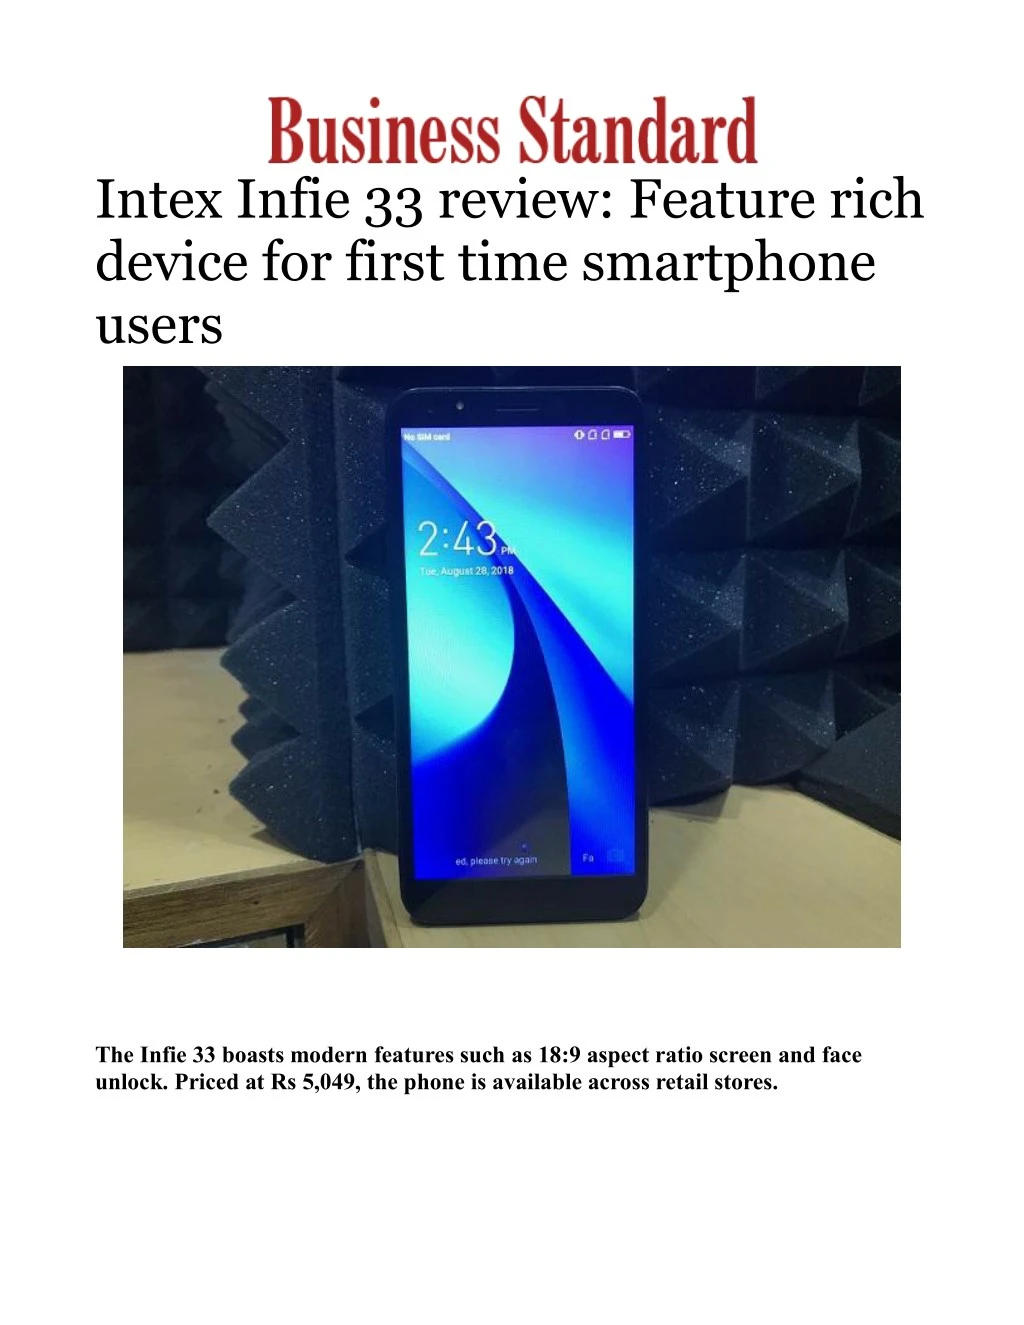 intex infie 33 review feature rich device